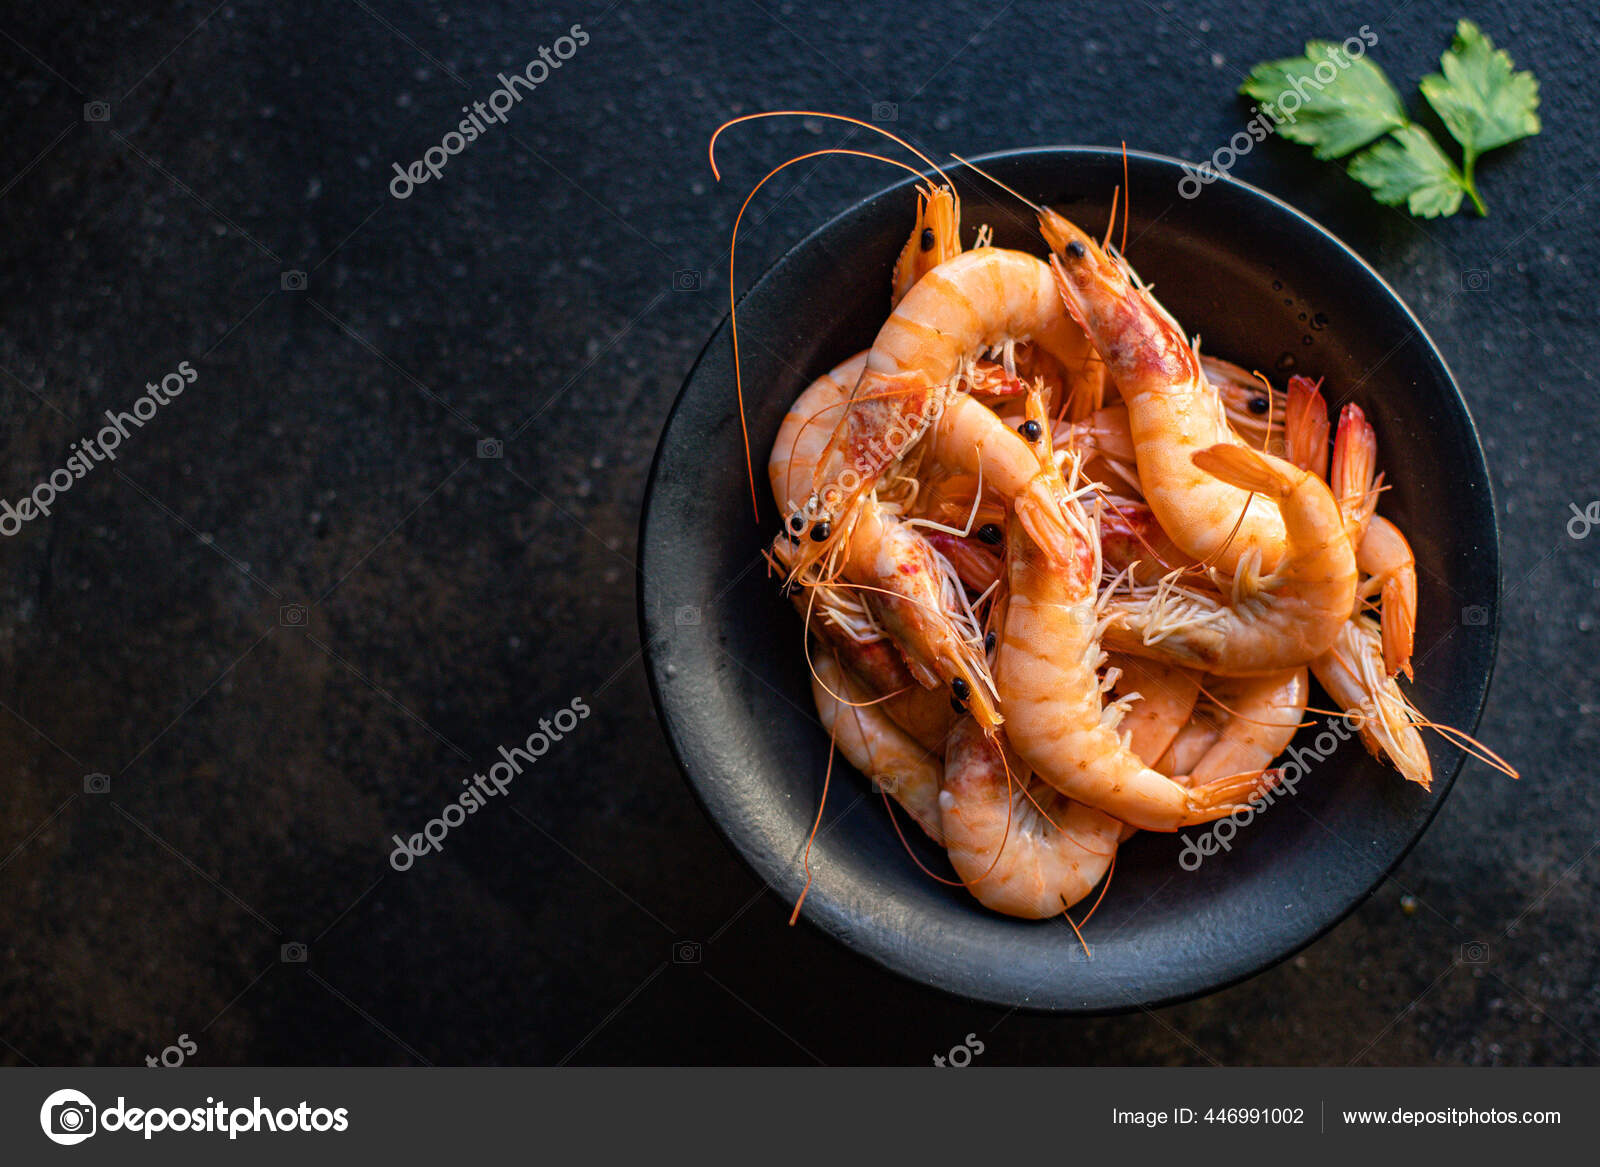 Prawn Shrimp Ready Eat Seafood Crustacean Table Meal Snack Outdoor